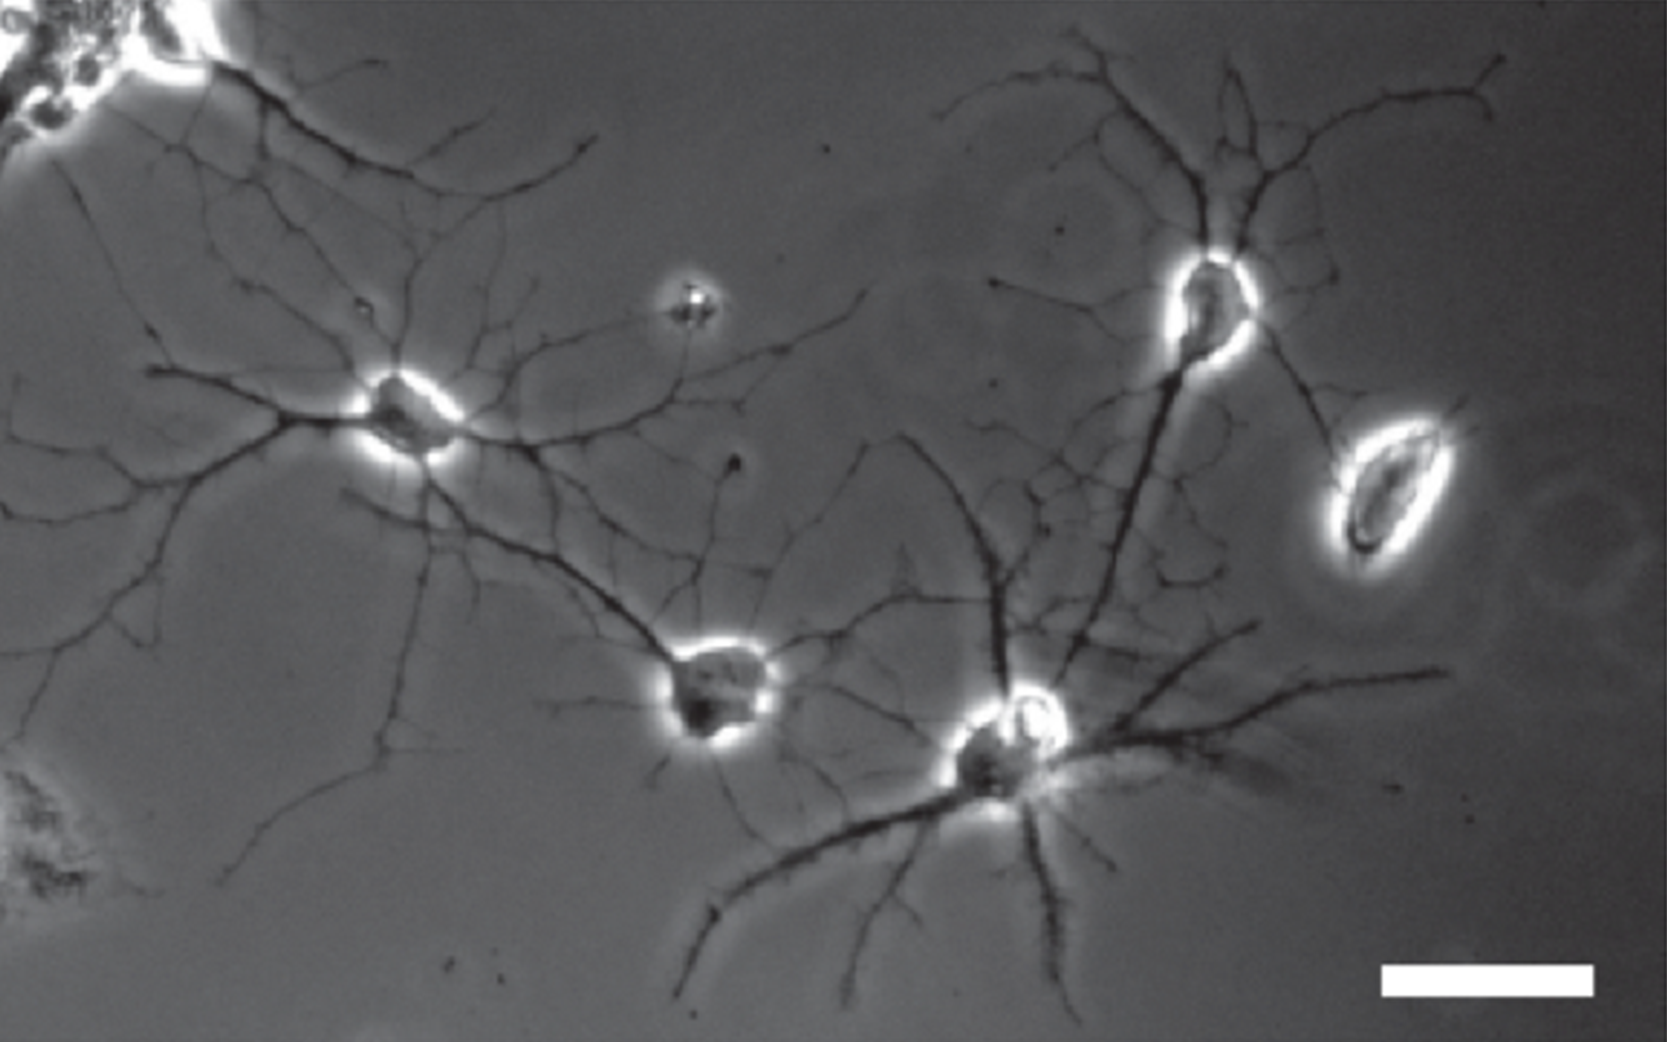 Human Astrocyte - astrocytes and brain disorders